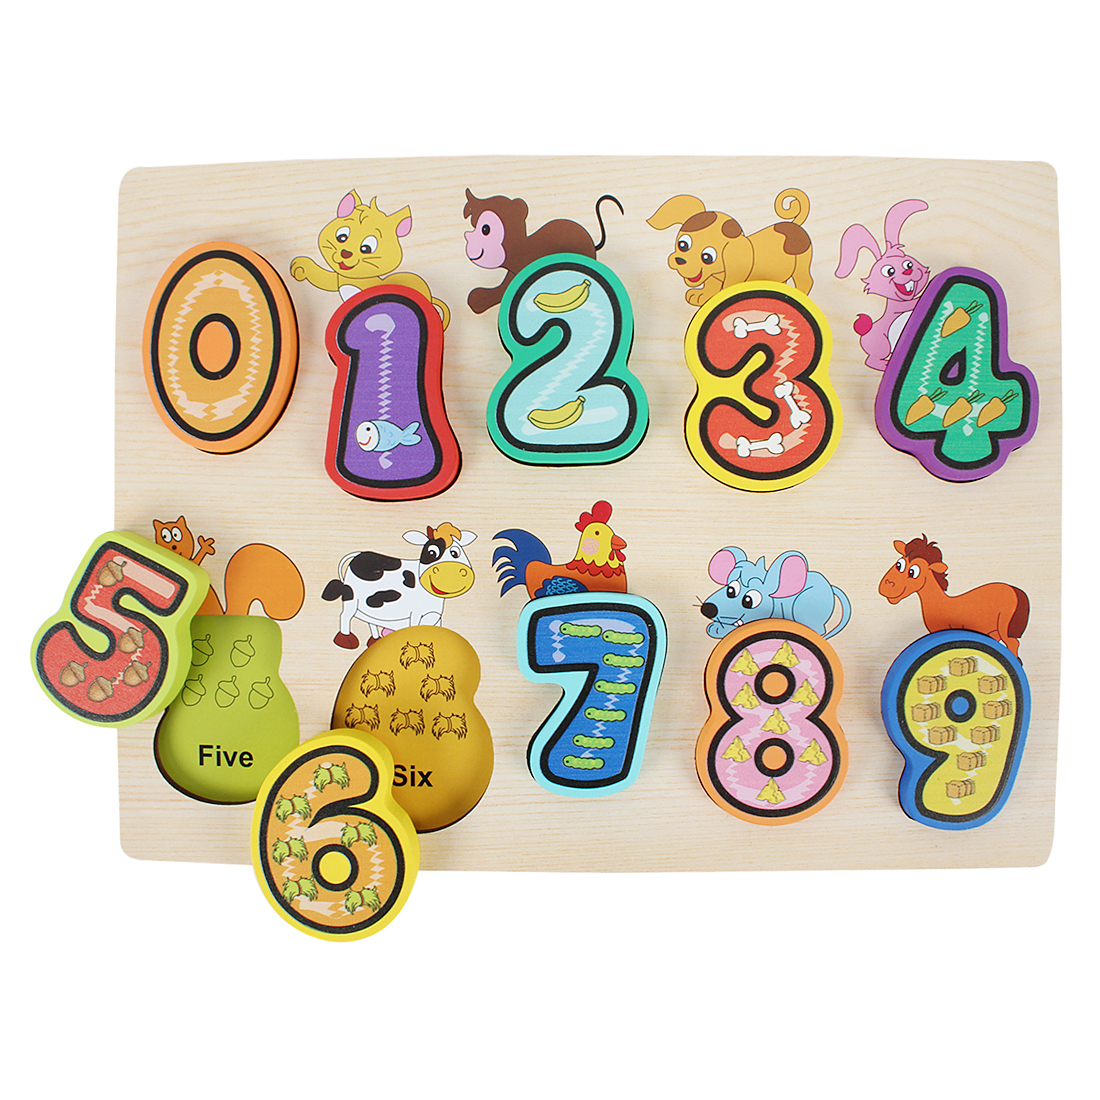 DSY0003-DESIYA,Knob puzzle , Jigsaw puzzle, Chunky puzzle, Other fun puzzle, Cube puzzle, Puzzle in the box,Wooden Block ,Marble Run,Doll House,Kitchen set, wooden outdoor